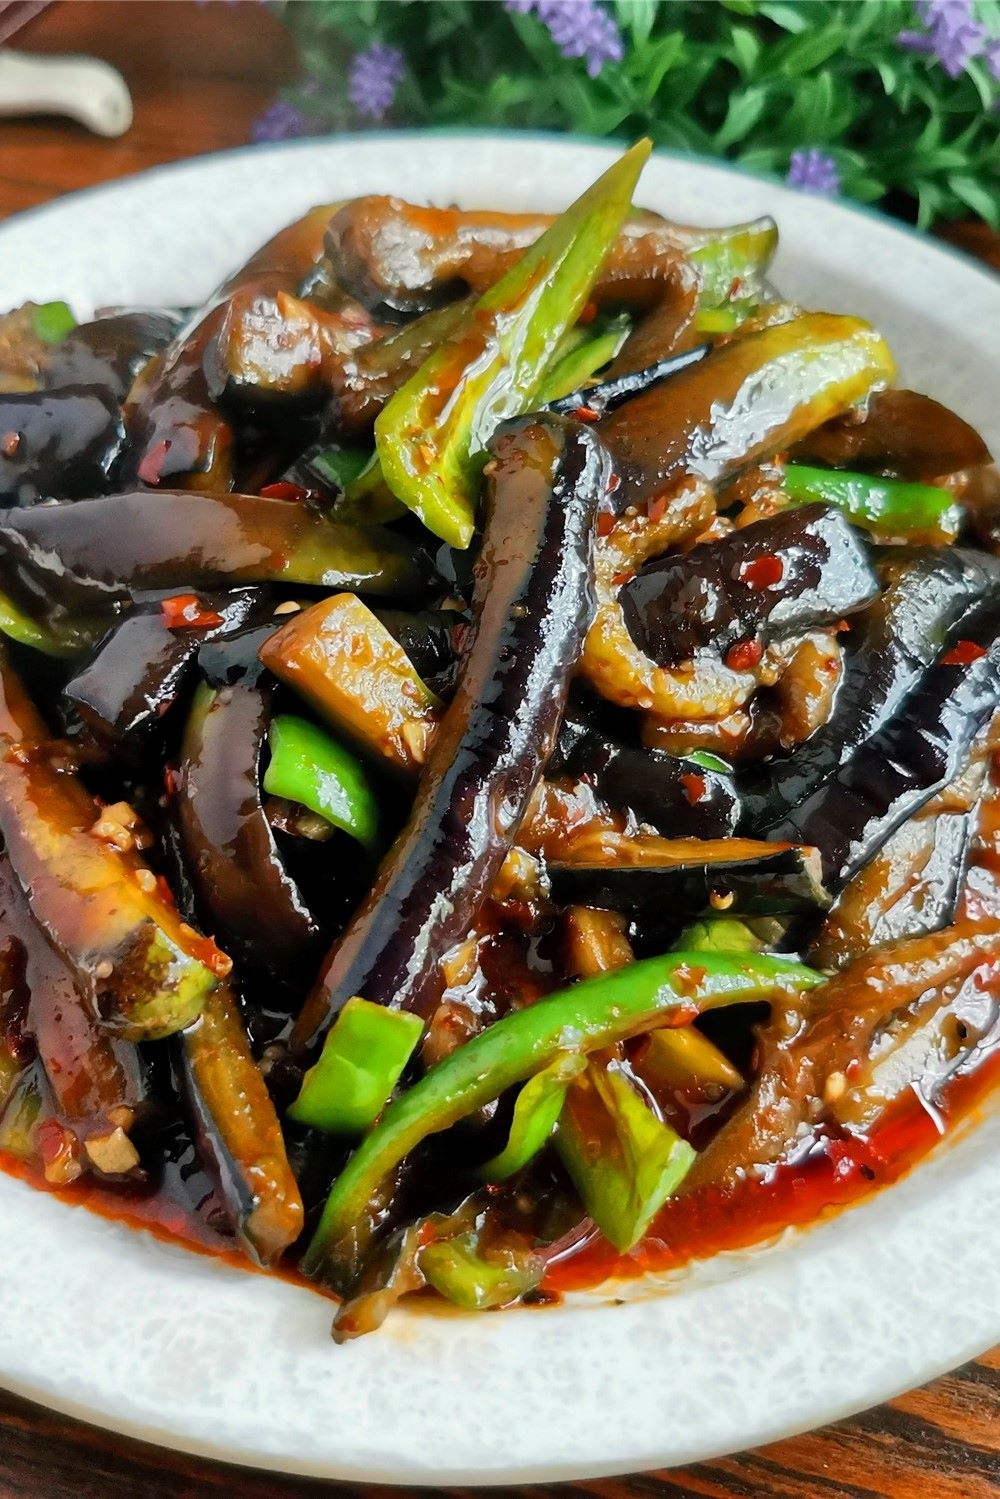 Chinese Eggplants with cubanelle peppers in chili garlic sauce